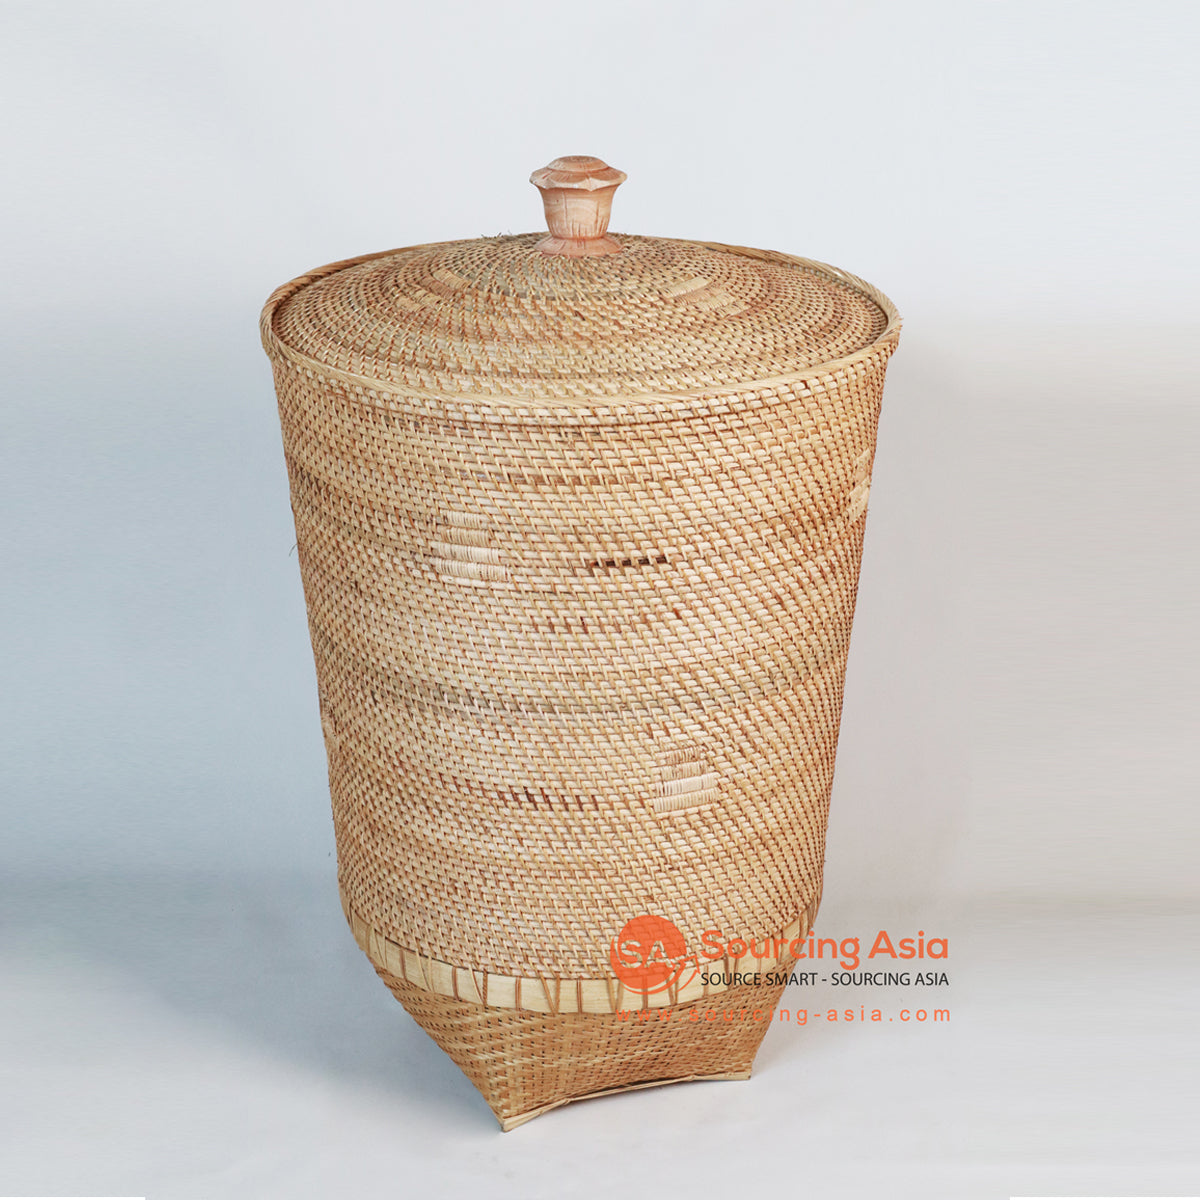 ALI079 NATURAL WOVEN RATTAN LAUNDRY BASKET WITH LID